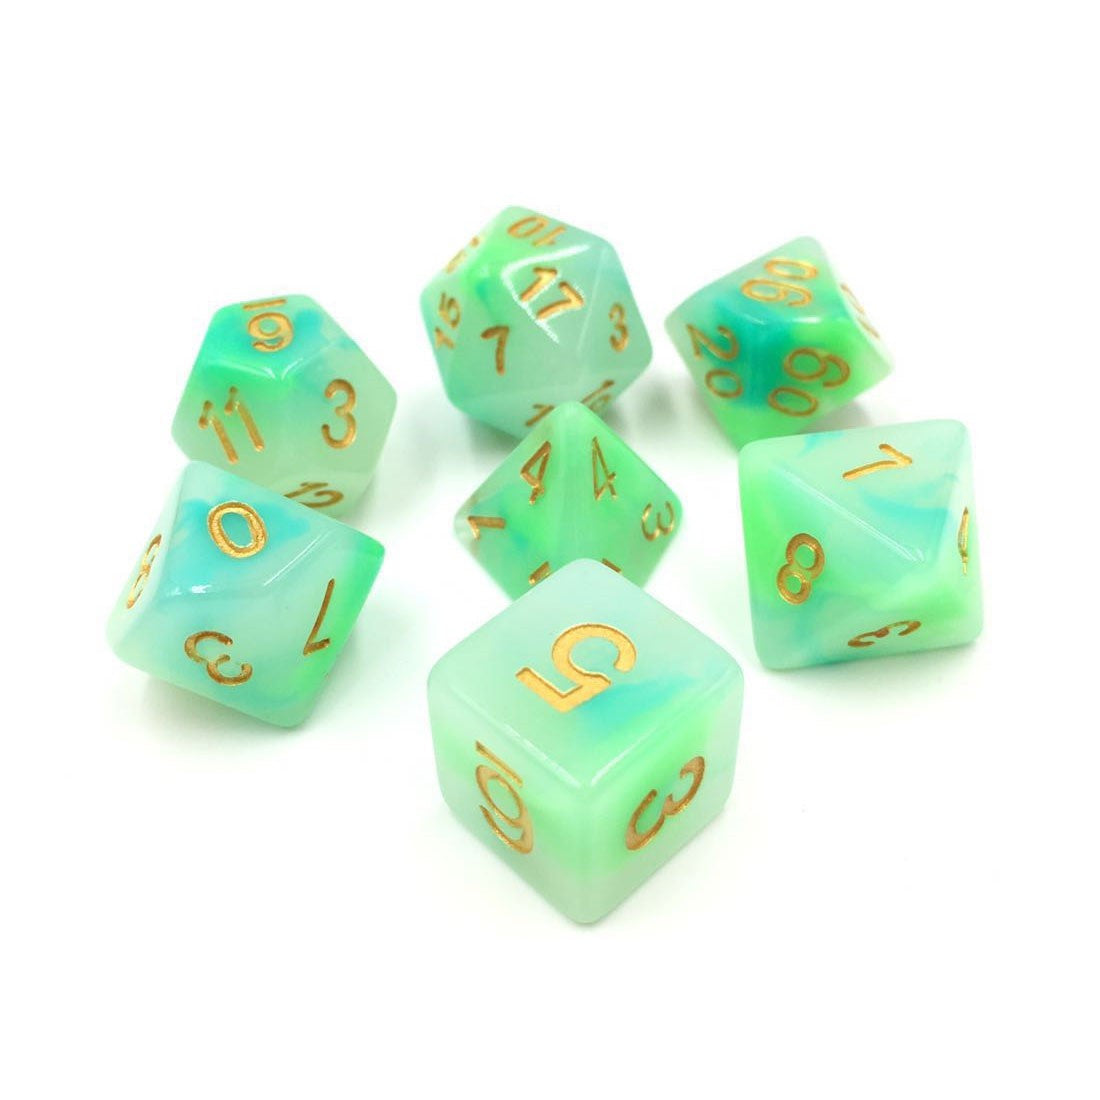 Blue and Green Opalescent Jade 7pc Dice Set Inked in Gold